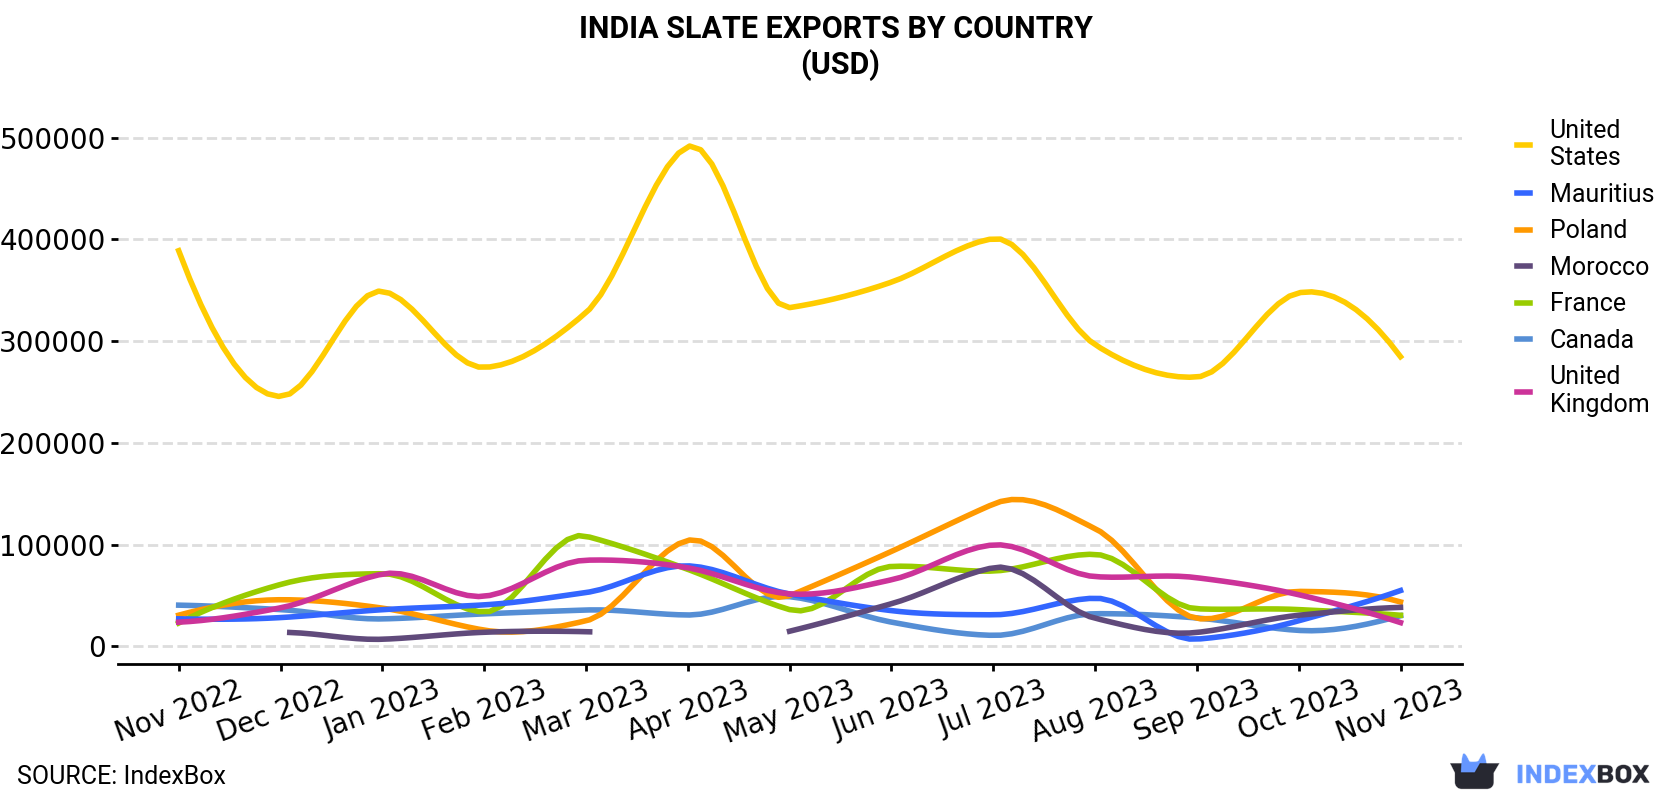 India Slate Exports By Country (USD)